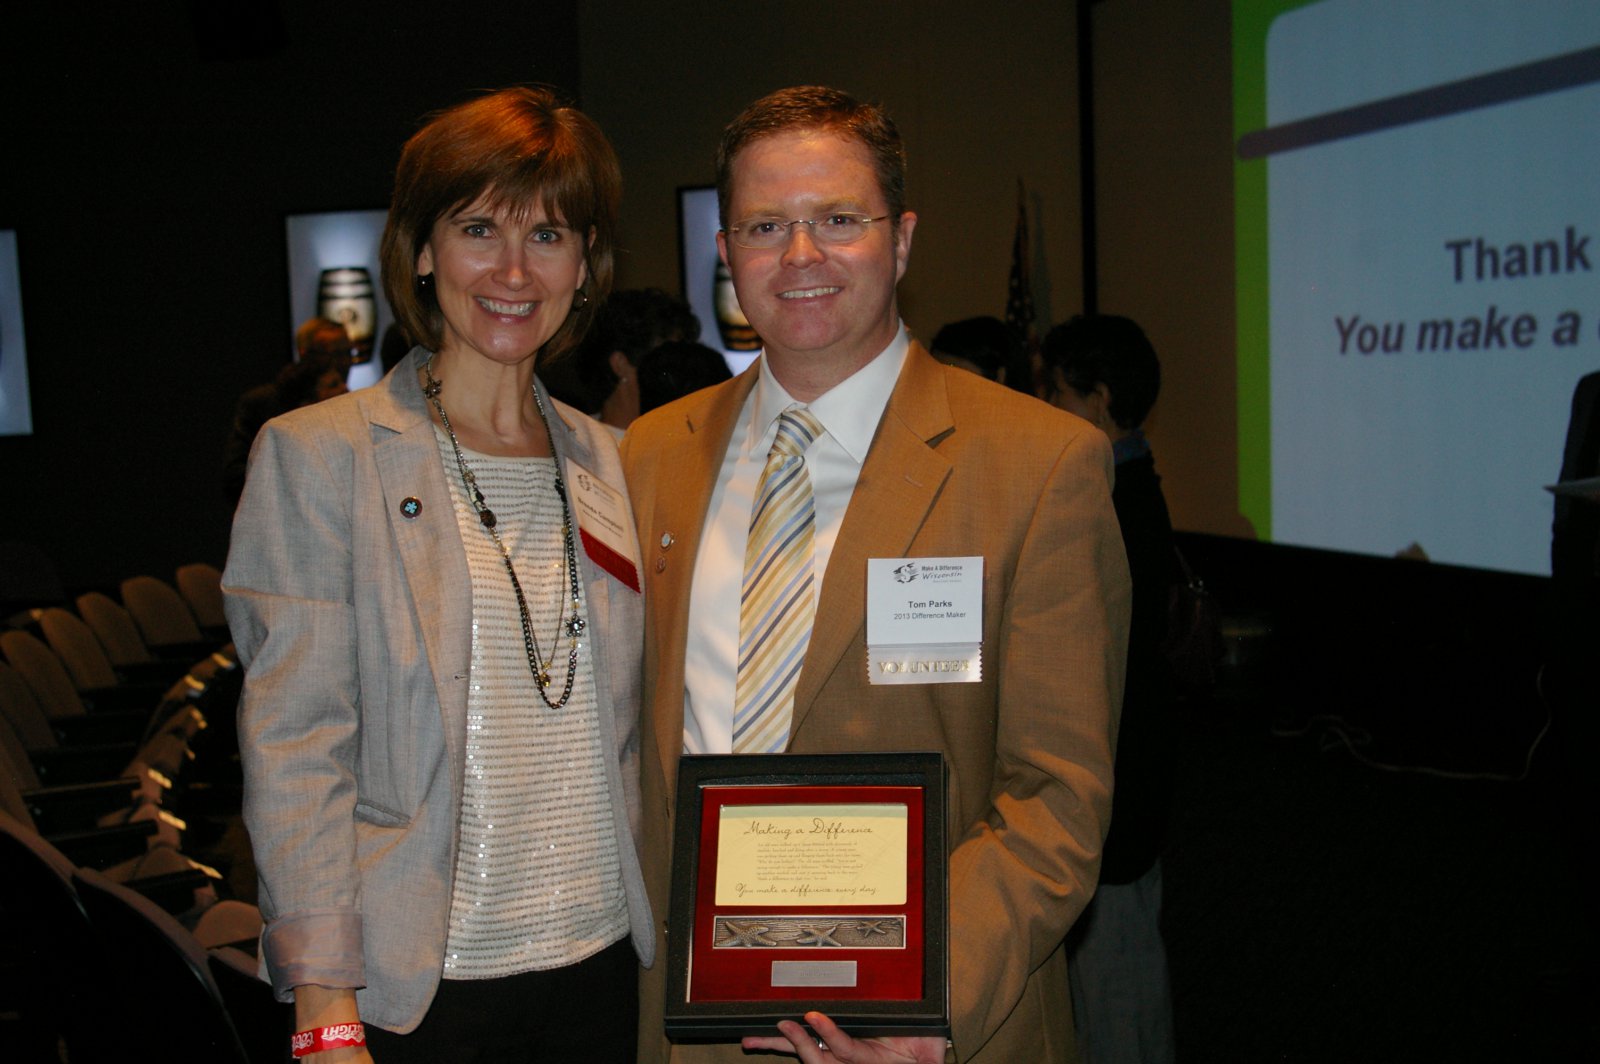 Brenda Campbell, Executive Director of Make A Difference Wisconsin, and Tom Parks